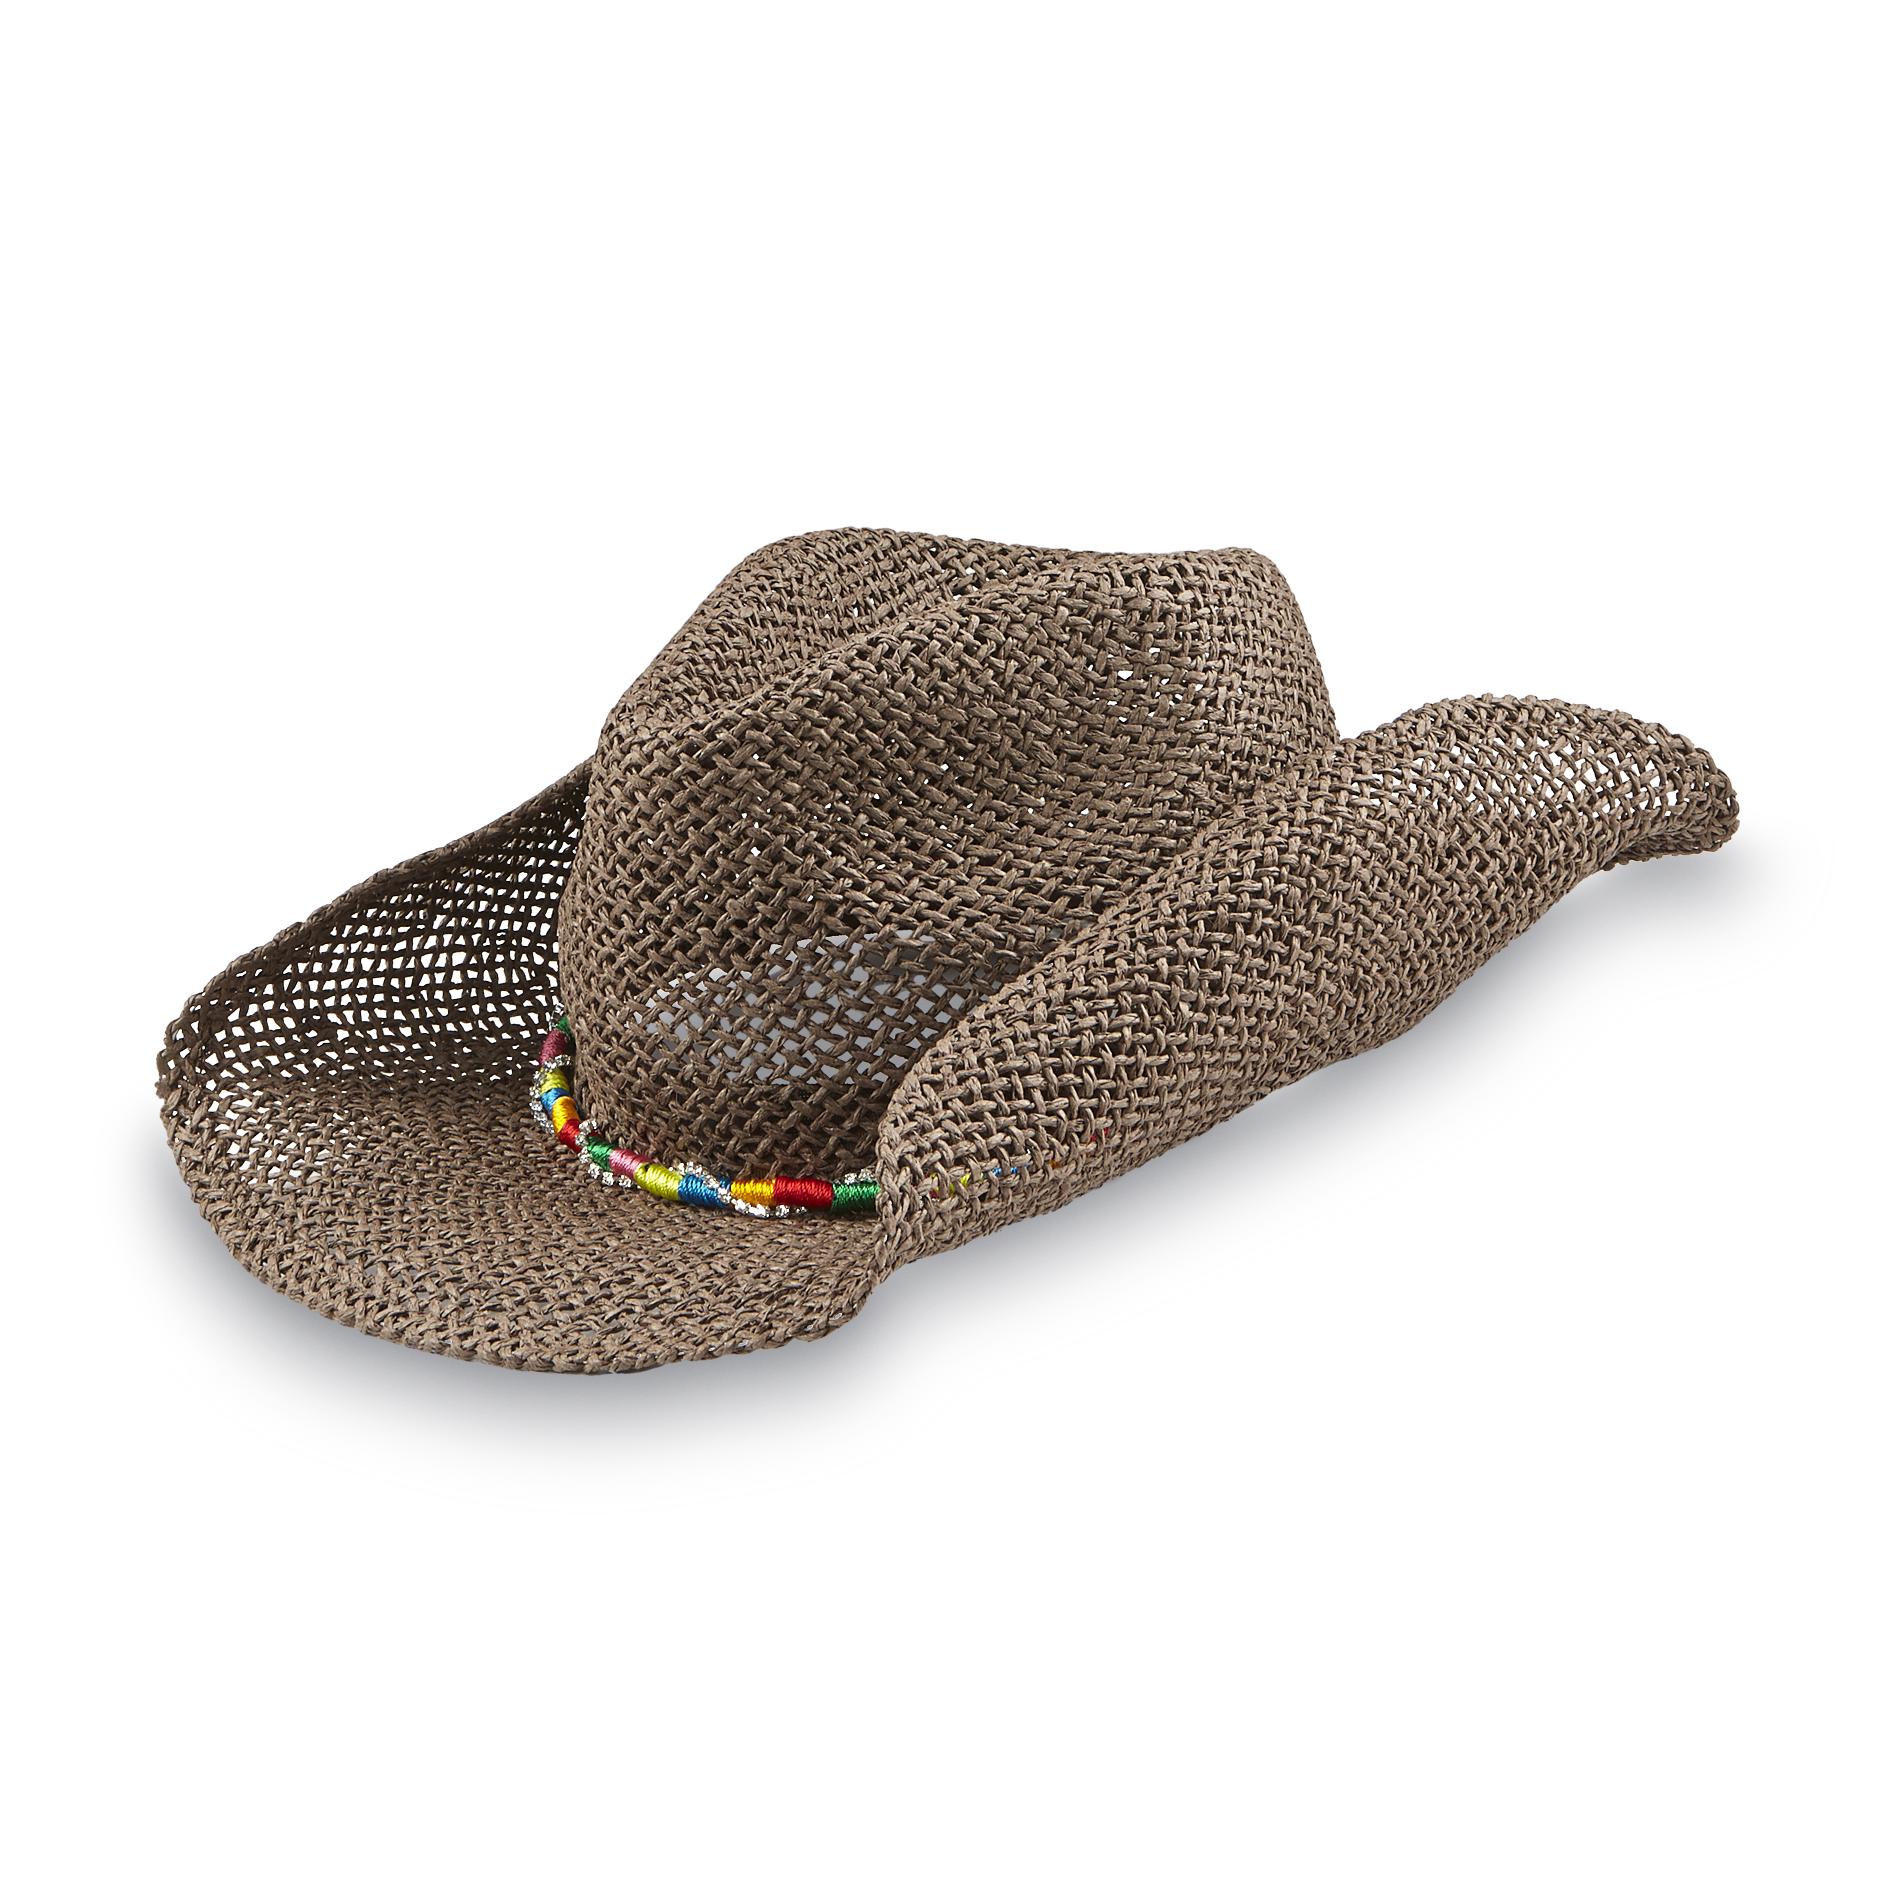 Joe Boxer Women's Banded Straw Cowgirl Hat